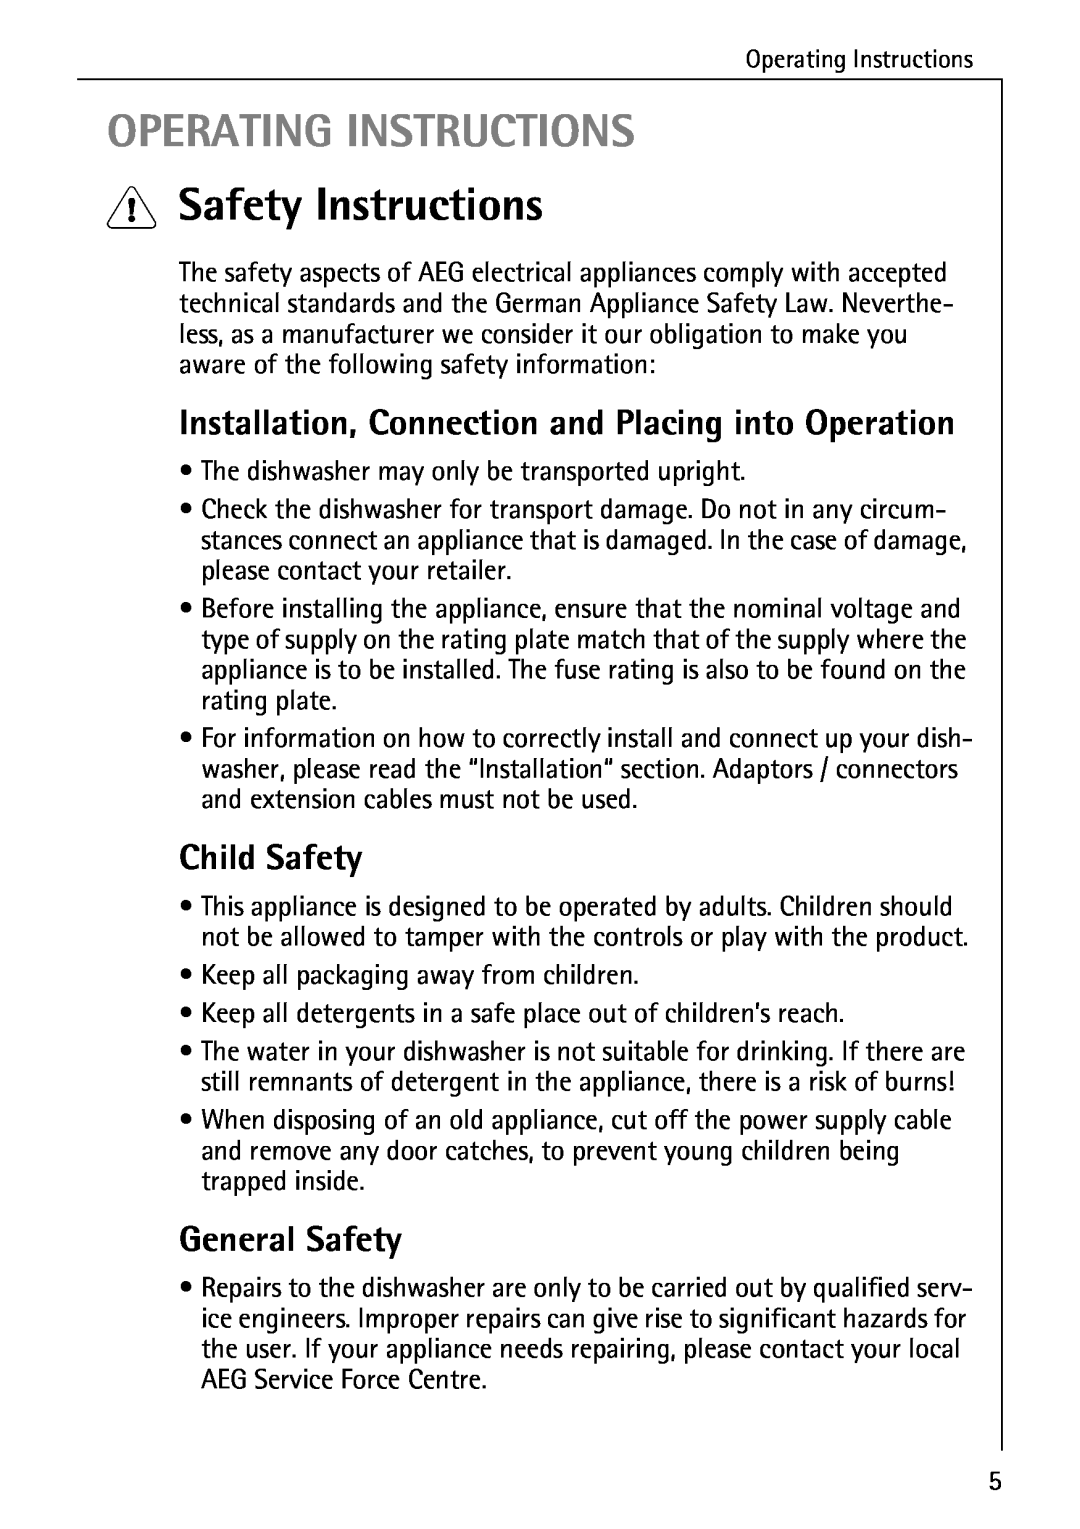 AEG 50760 I Operating Instructions, Safety Instructions, Installation, Connection and Placing into Operation, Child Safety 